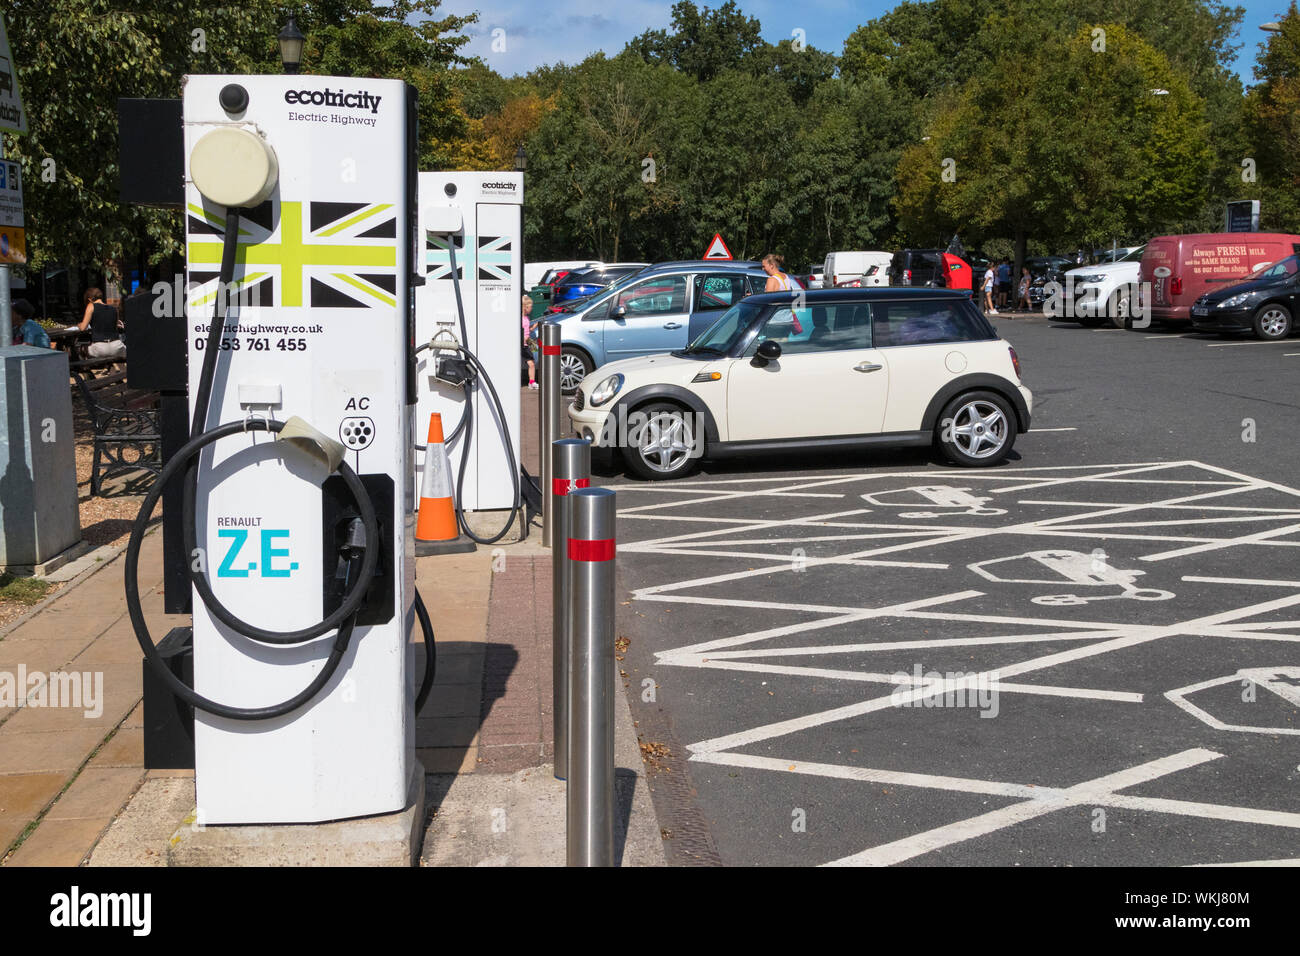 Ecotricity, electric charging point, electric highway,  maidstone service station, kent, uk Stock Photo